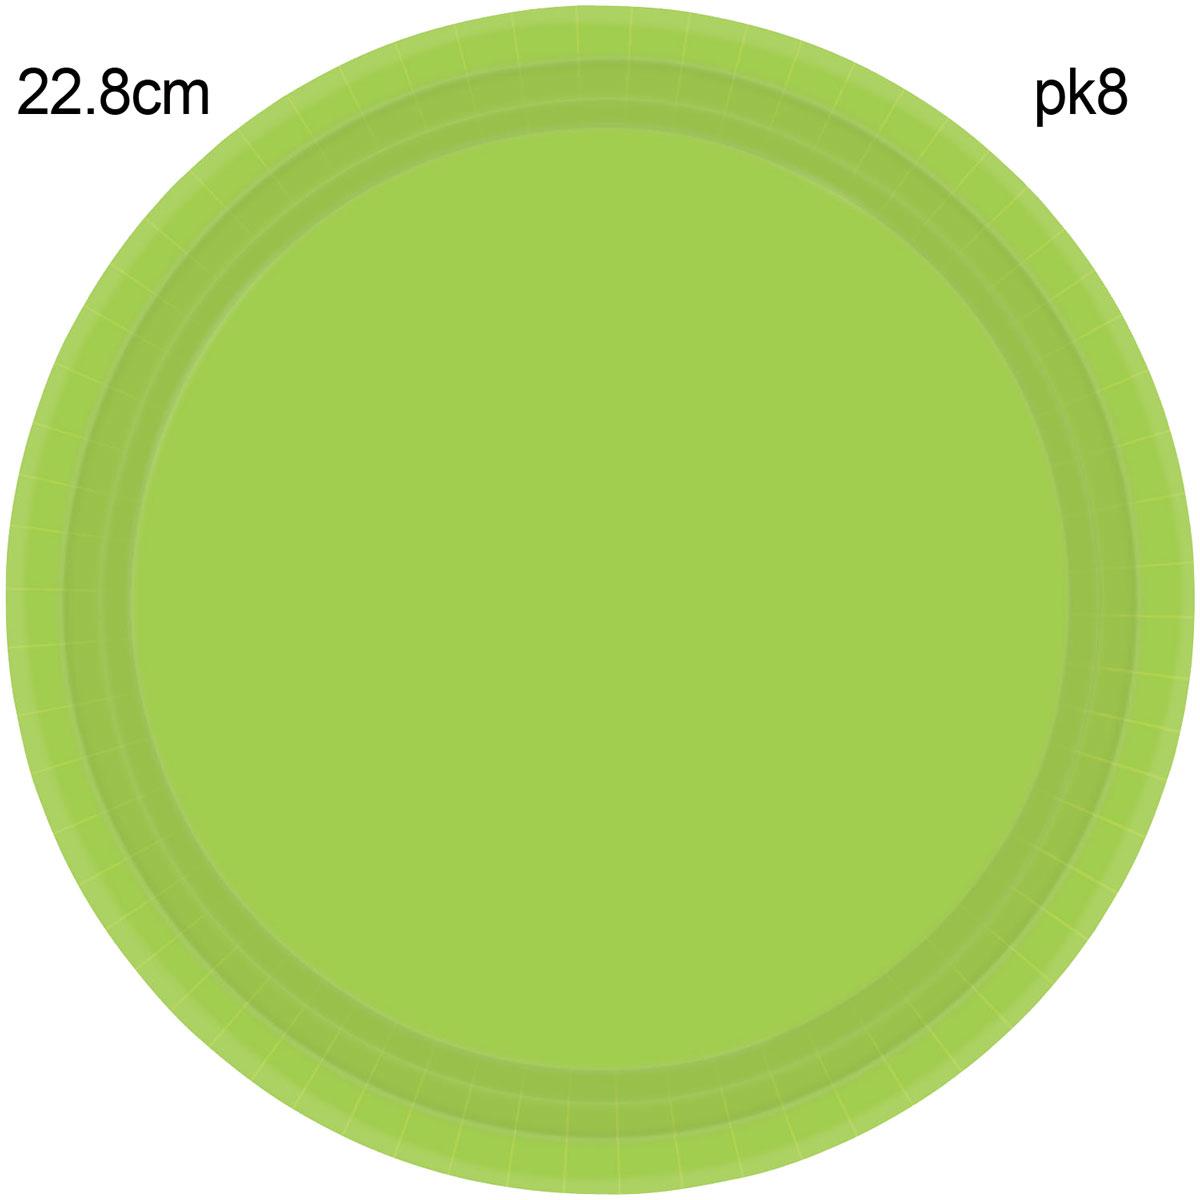 Pack 8 Kiwi Green 22.8cm Paper Dinner Plates by Amscan 55015-53 avaiilable here at Karnival Costumes online party shop